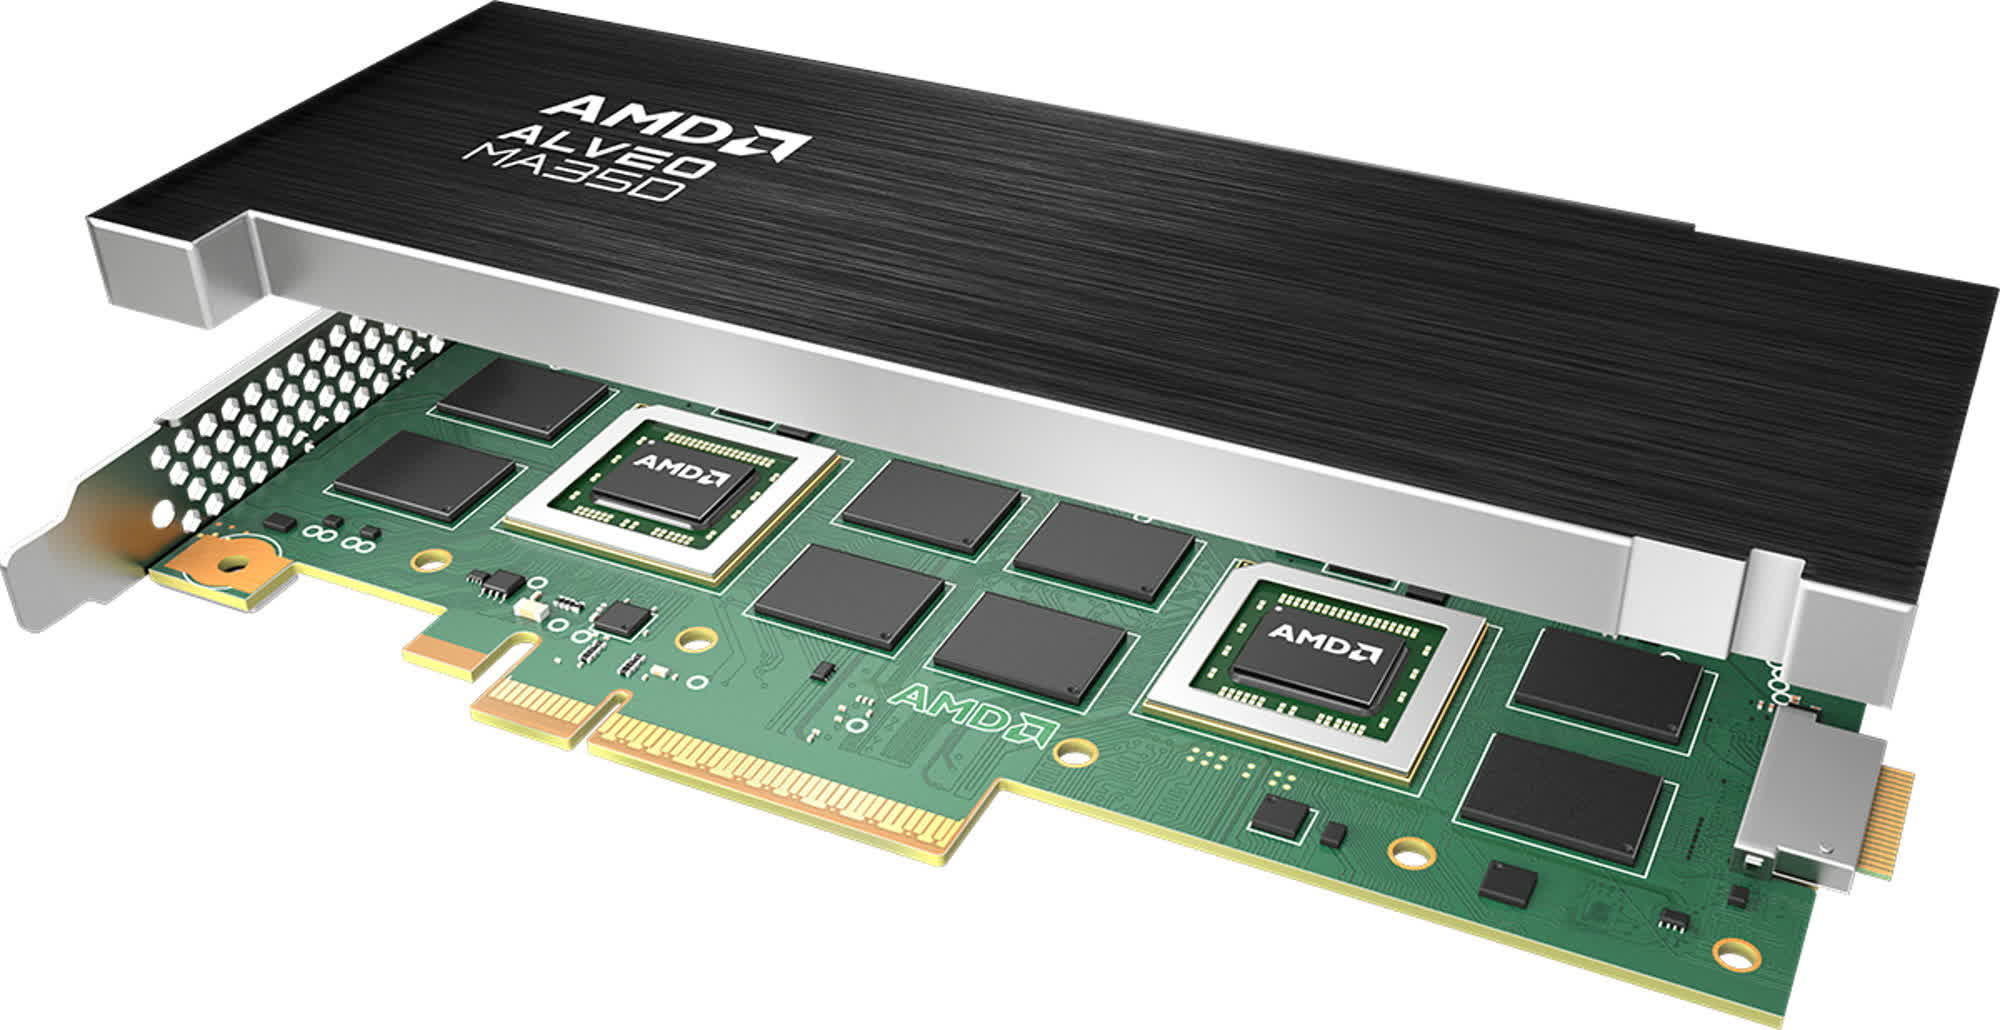 Alveo MA35D is AMD's new media accelerator for efficient video streaming